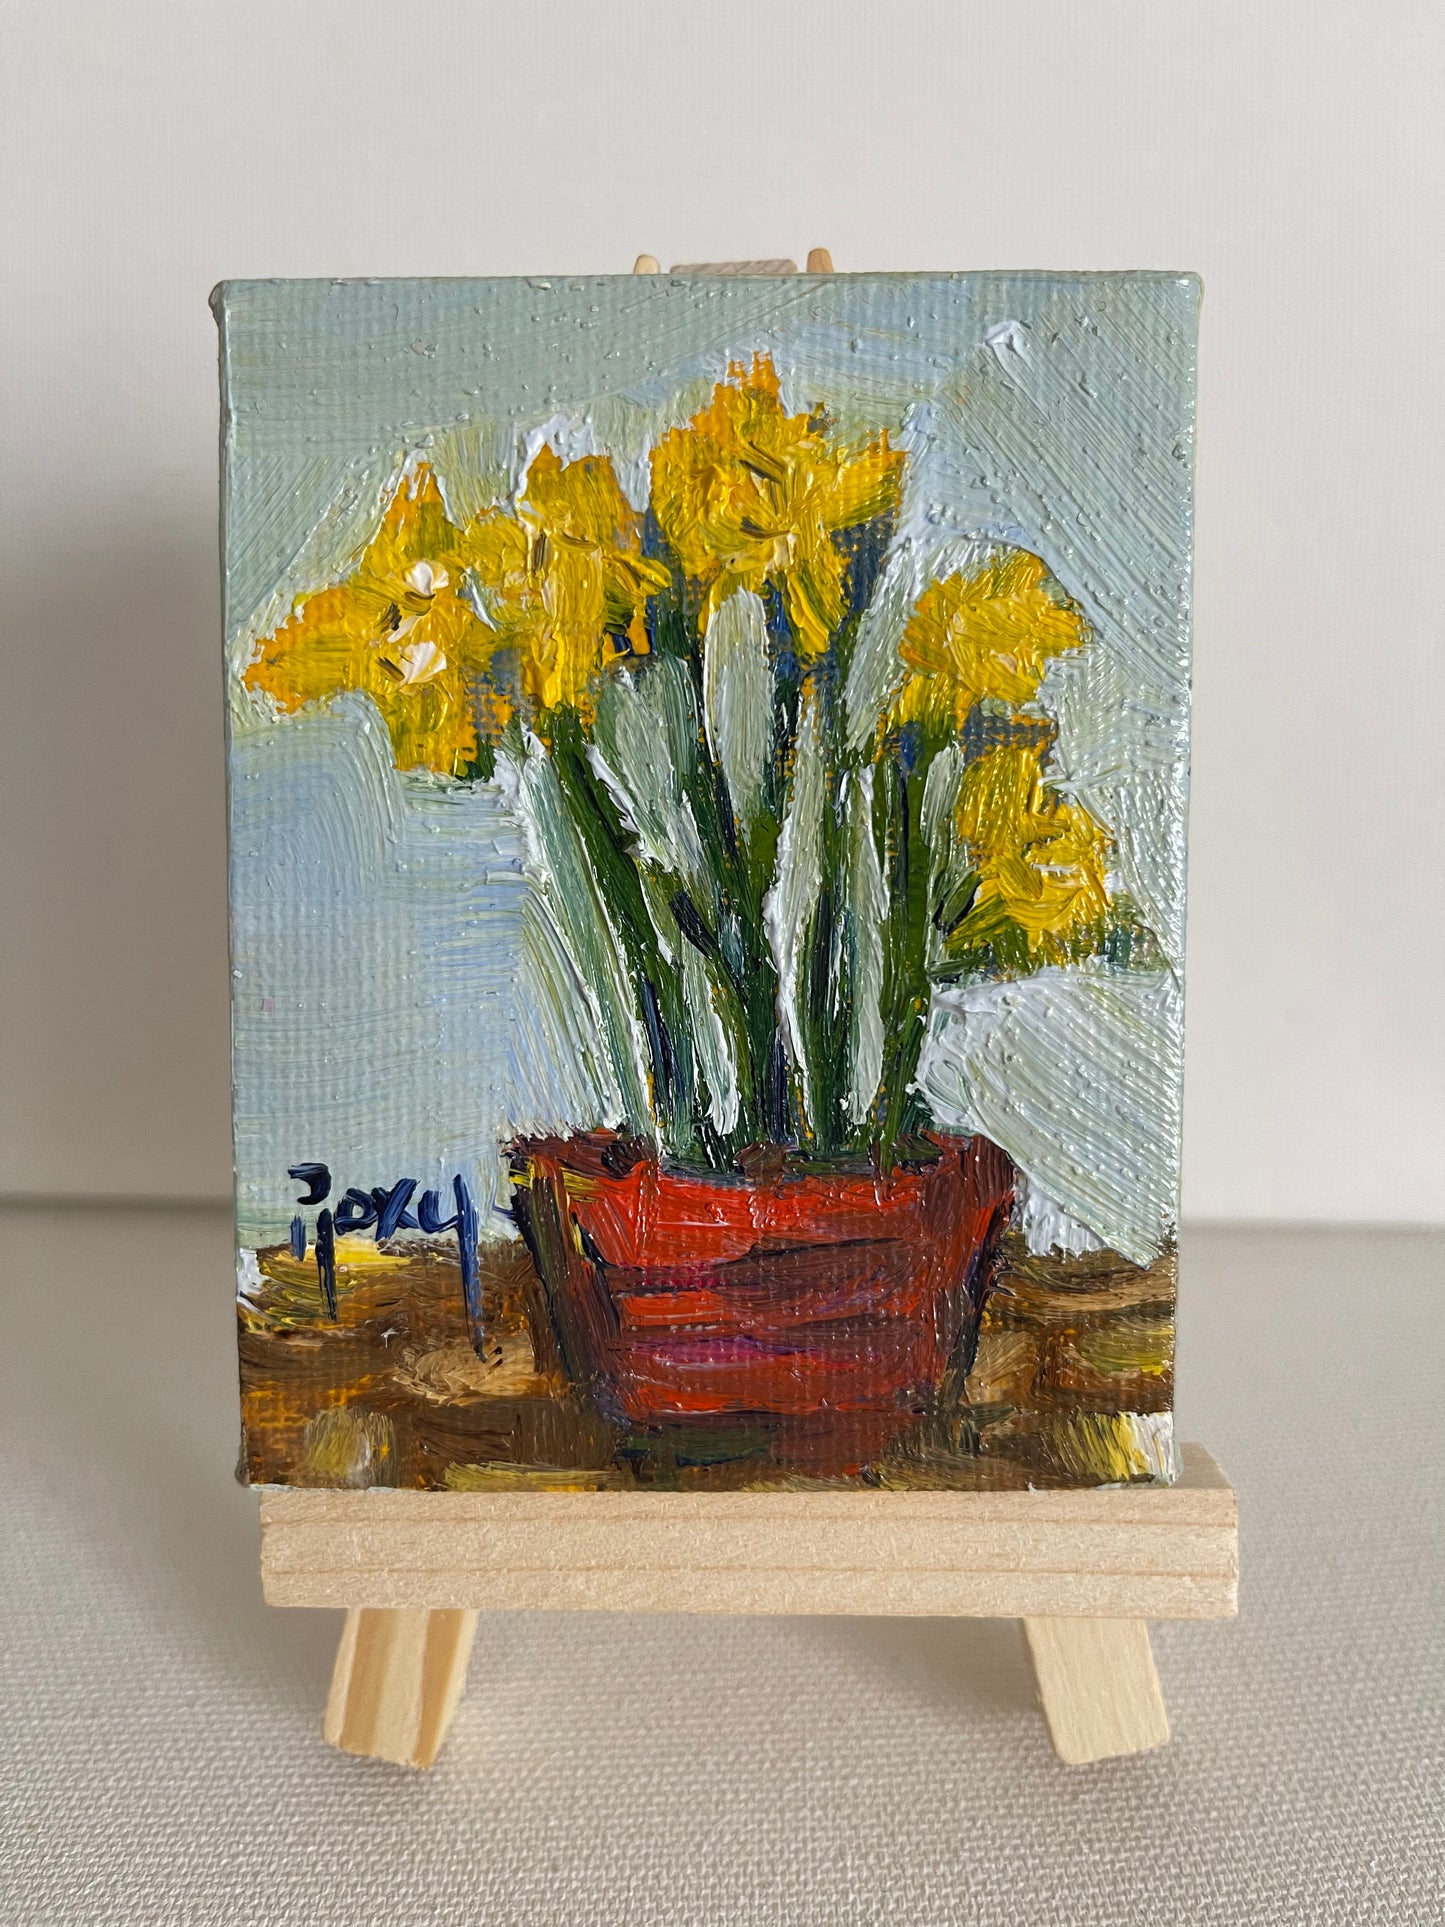 Daffodils-Original Miniature Oil Painting with Stand